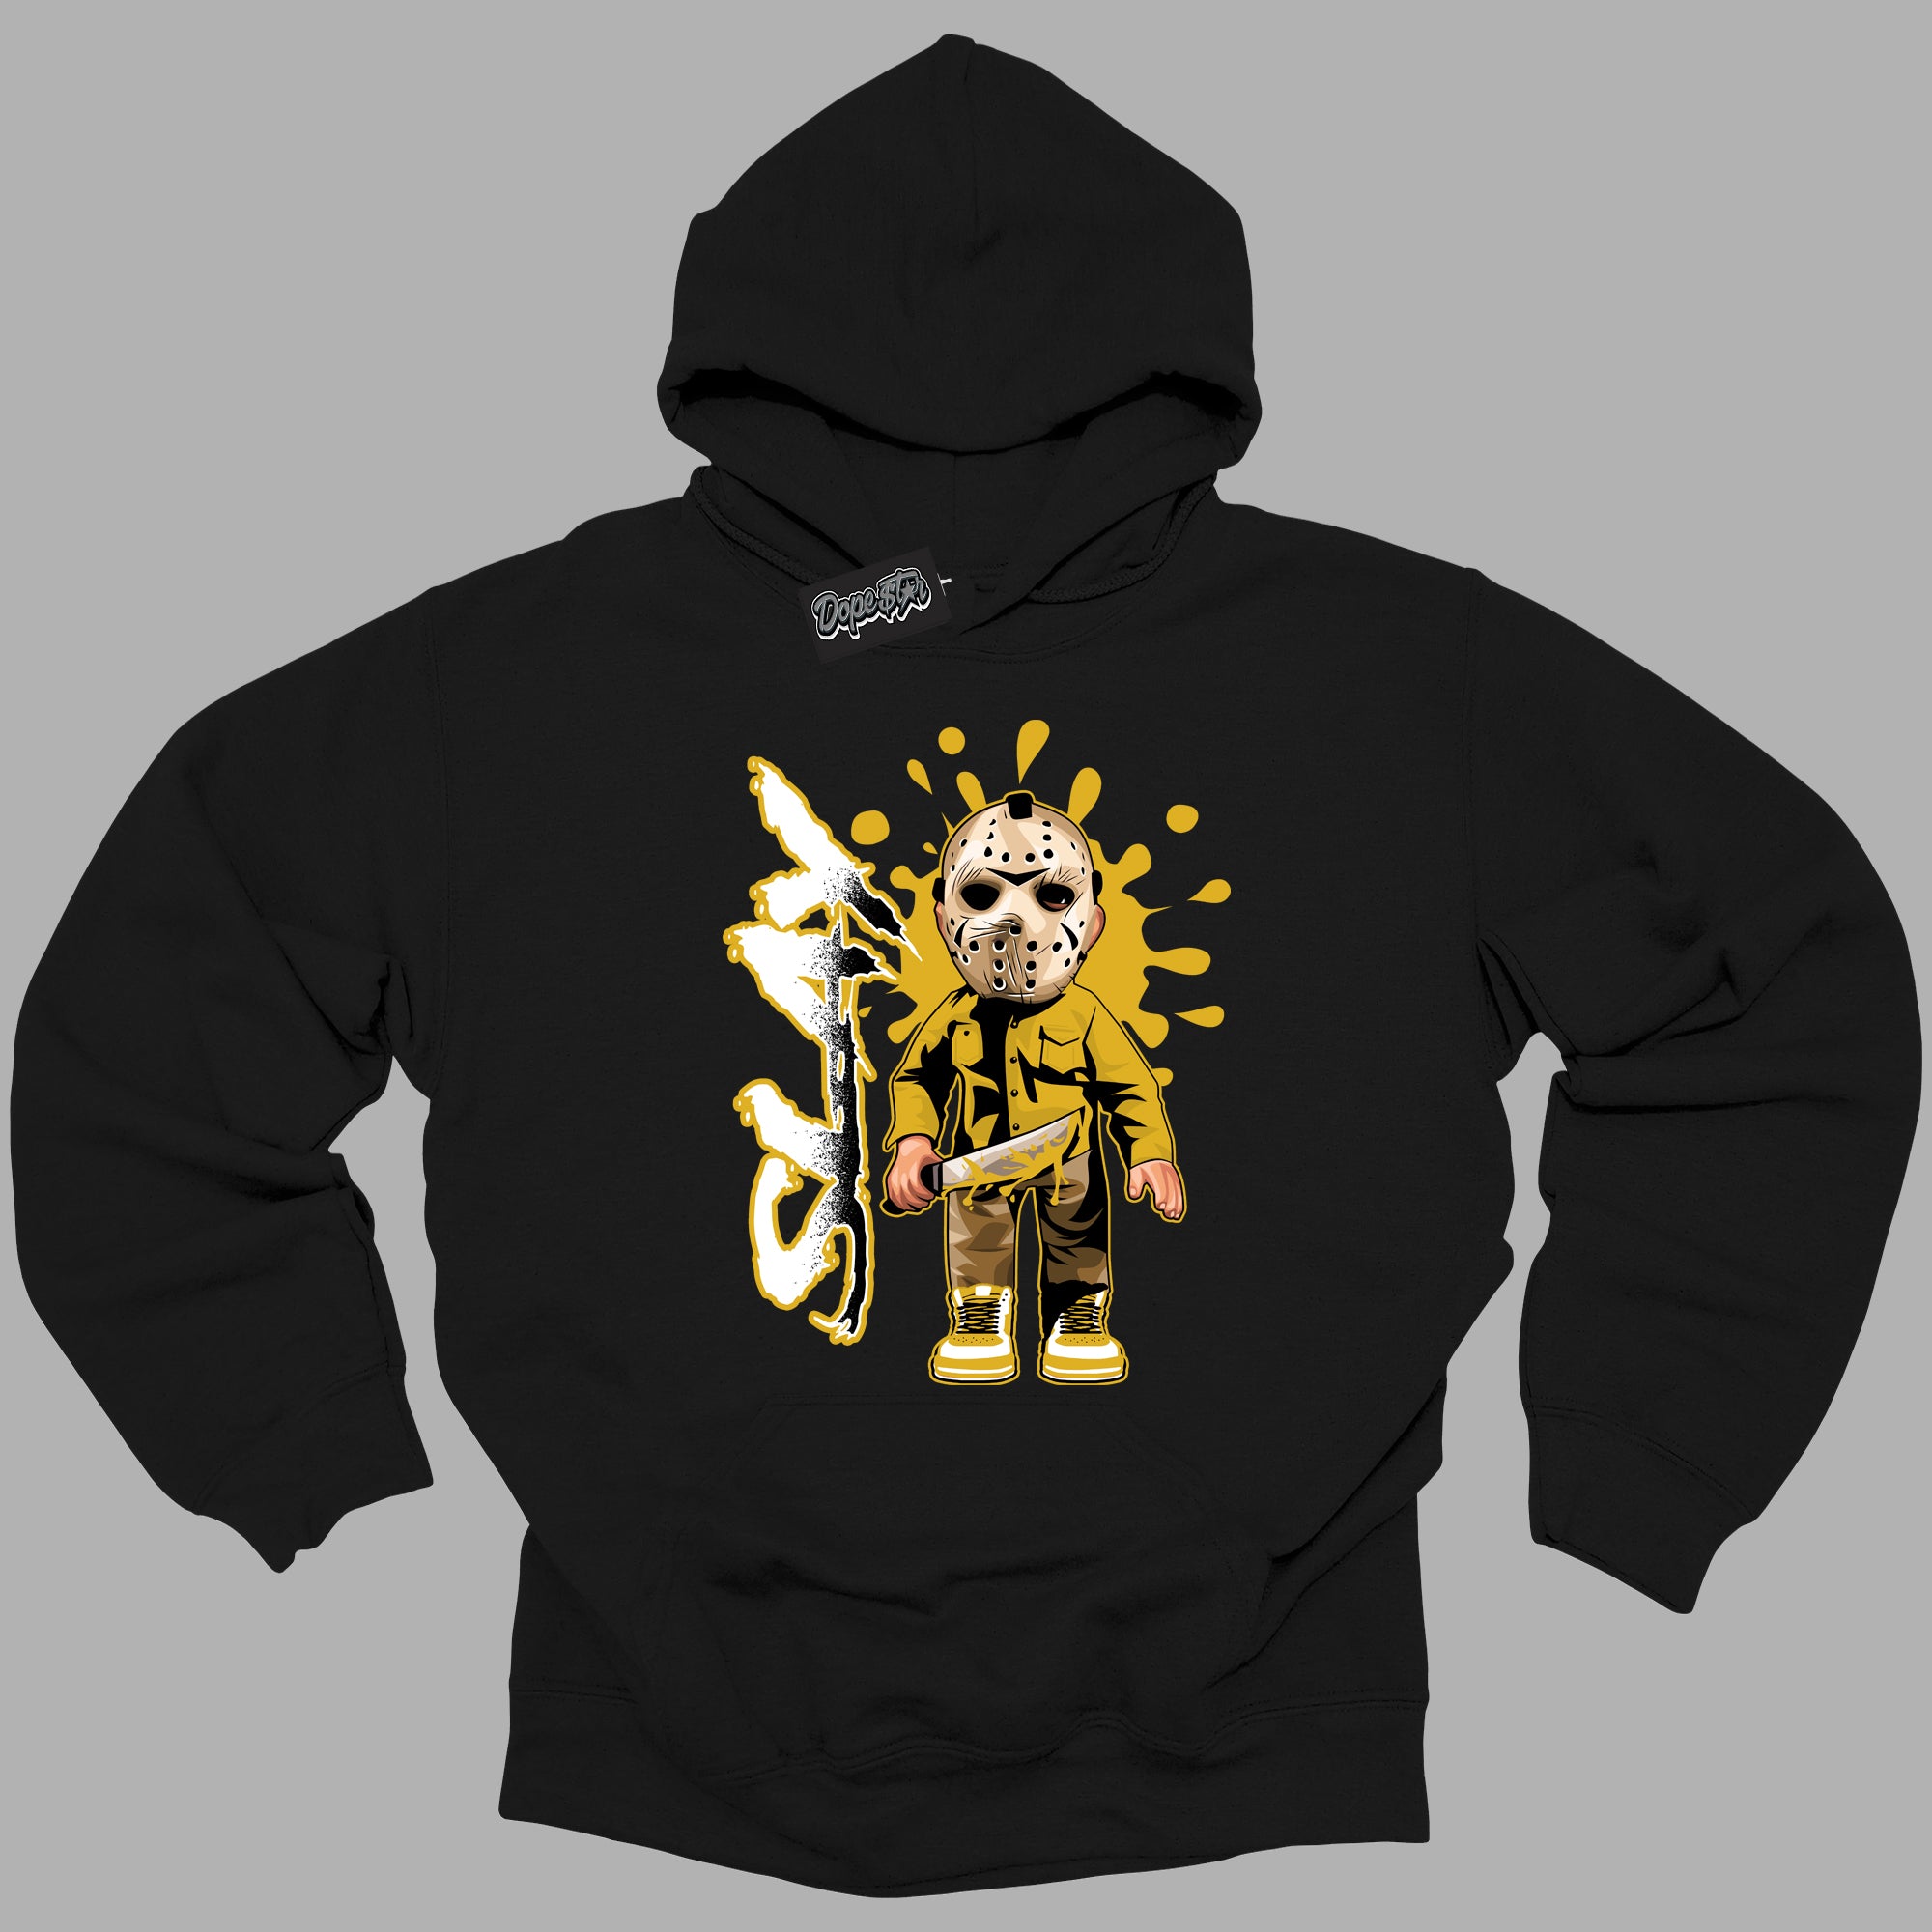 Cool Black Hoodie with “ Slay ”  design that Perfectly Matches Yellow Ochre 6s Sneakers.